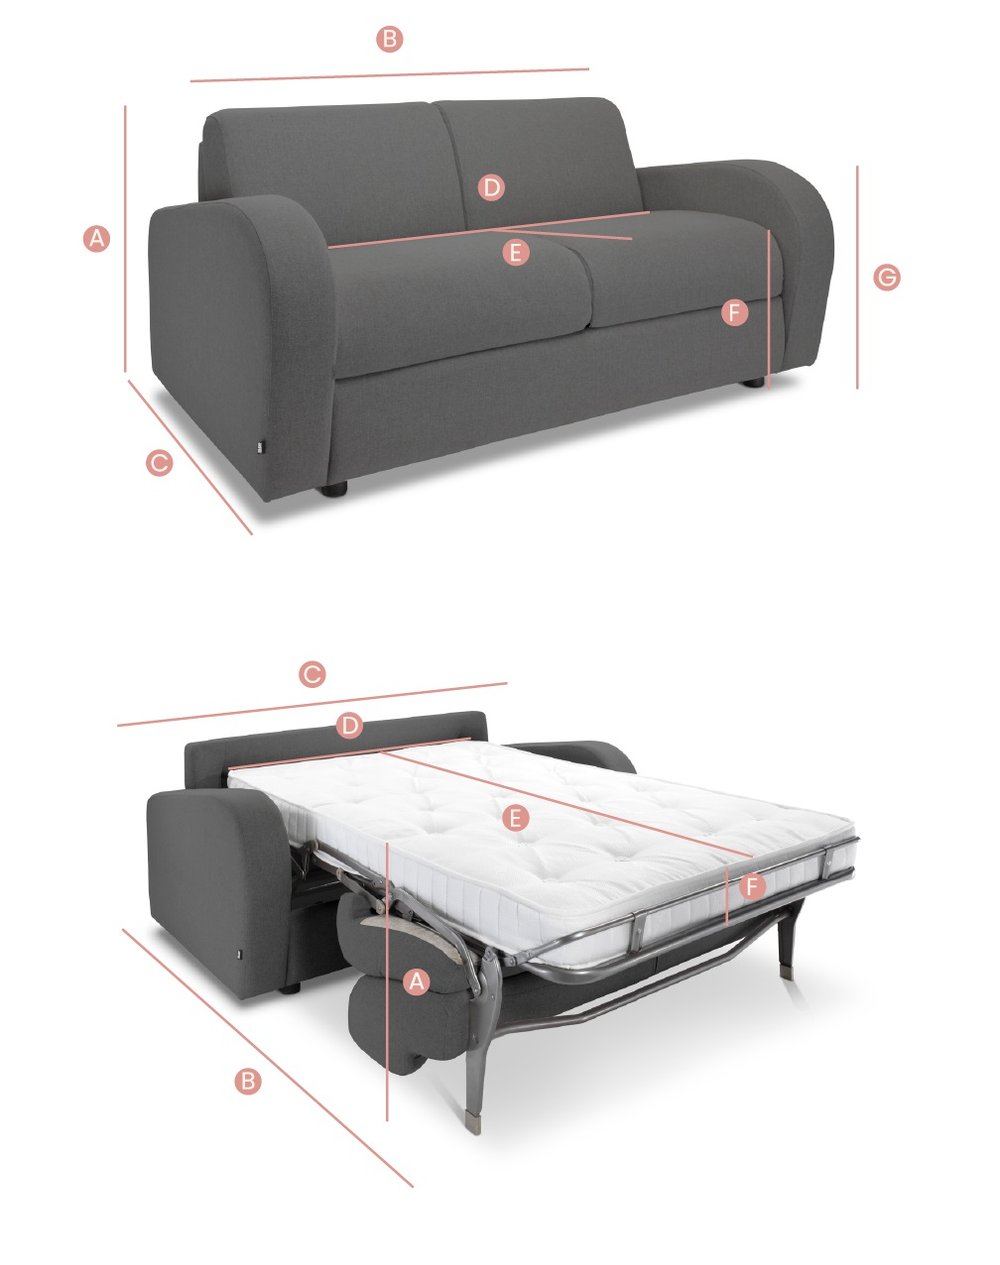 Jay-Be Retro 2 Seater Sofa Bed Dimensions Sketch